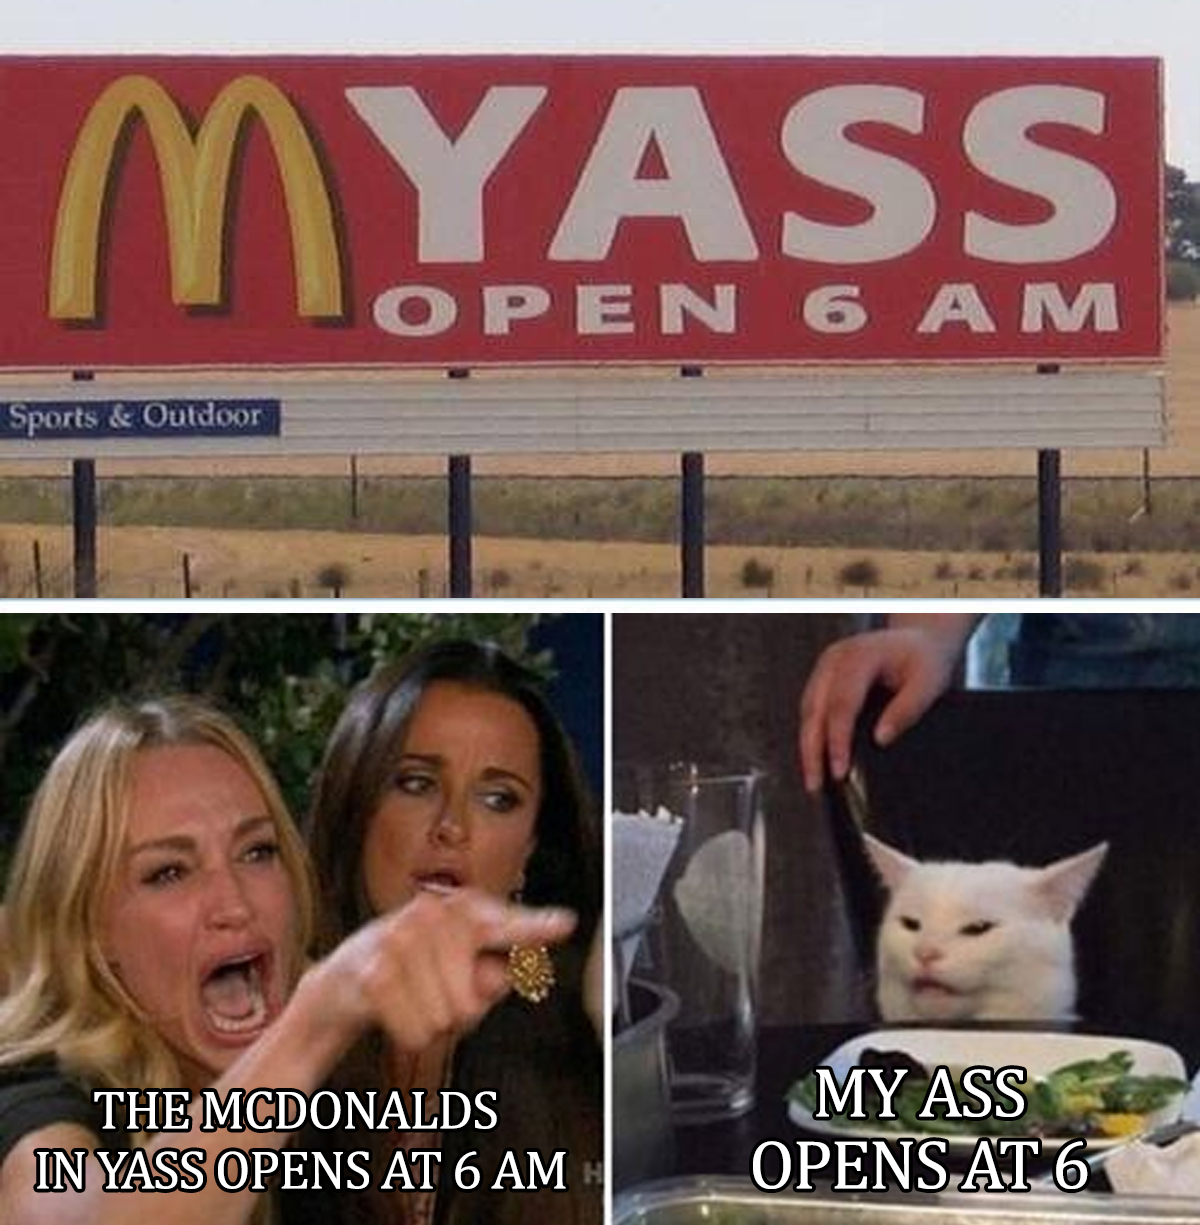 hold me closer tony danza - Myass Open 6 Am Sports & Outdoor The Mcdonalds In Yass Opens At 6 Am My Ass Opens At 6